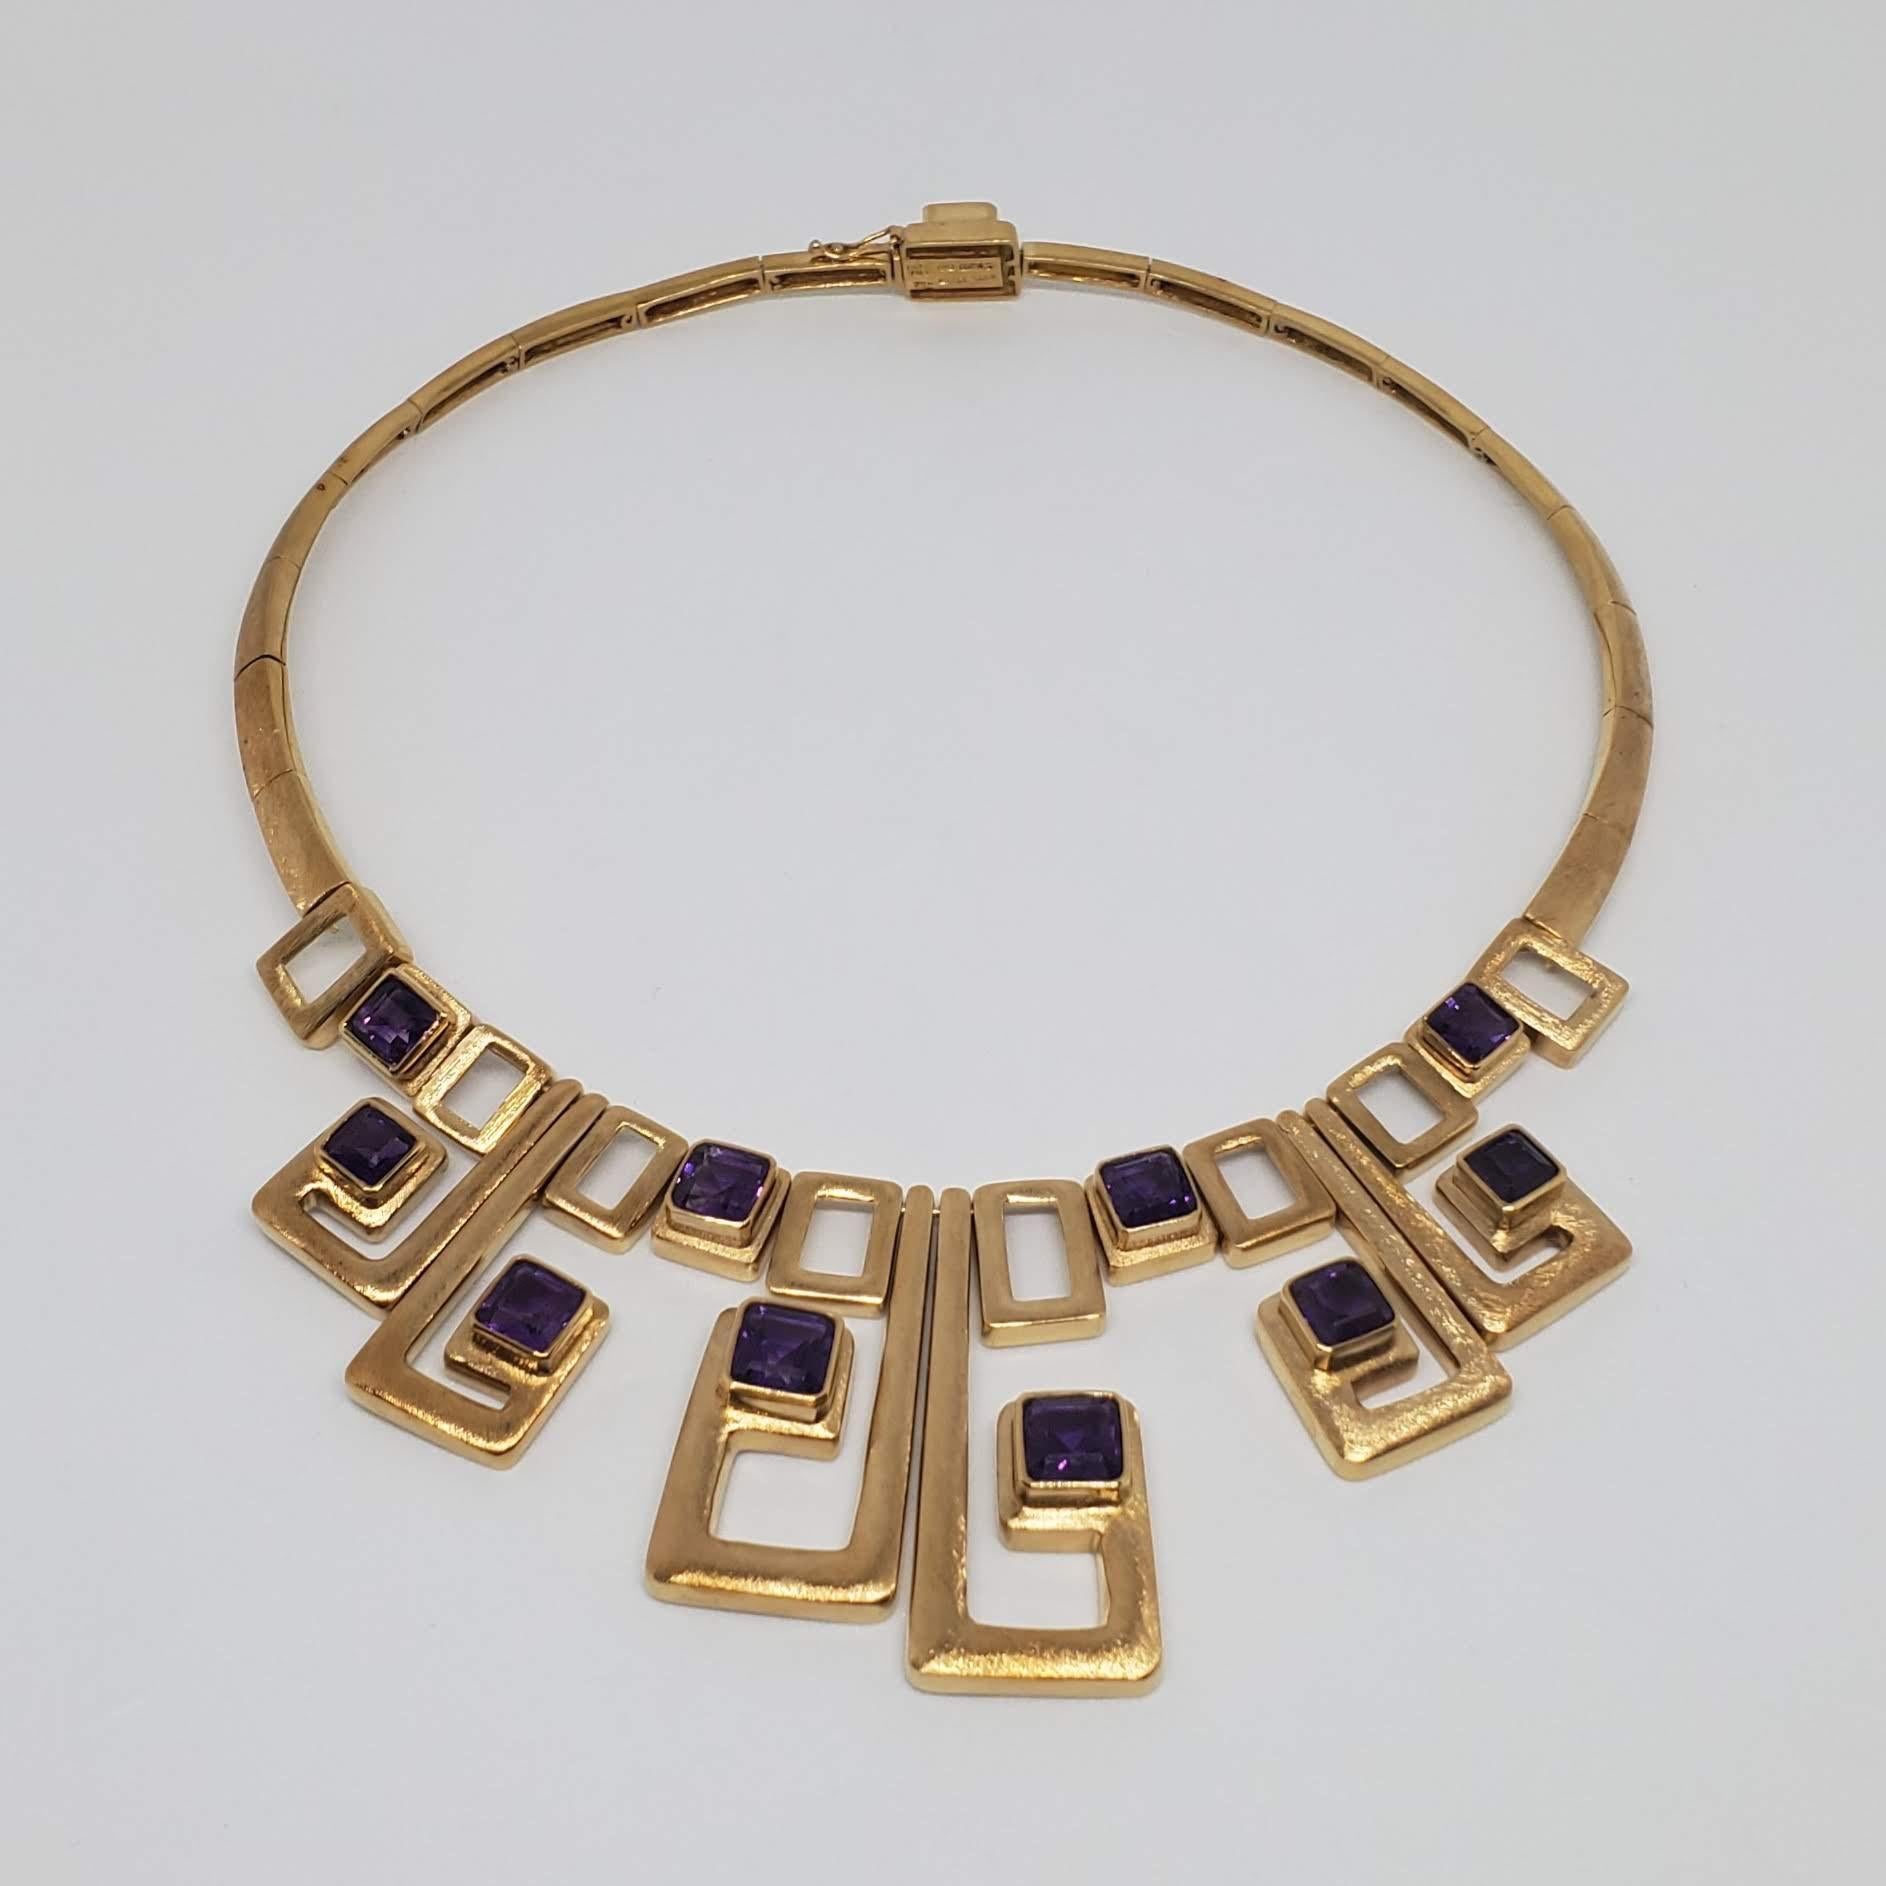 Thanks for taking a look at this stunningly beautiful Vintage Burle Marx 18 Karat Gold and Amethyst Necklace. This piece is in excellent condition, and is a beautiful example of the designs of Burle Marx and Master Goldsmith Bruno Guidi. The